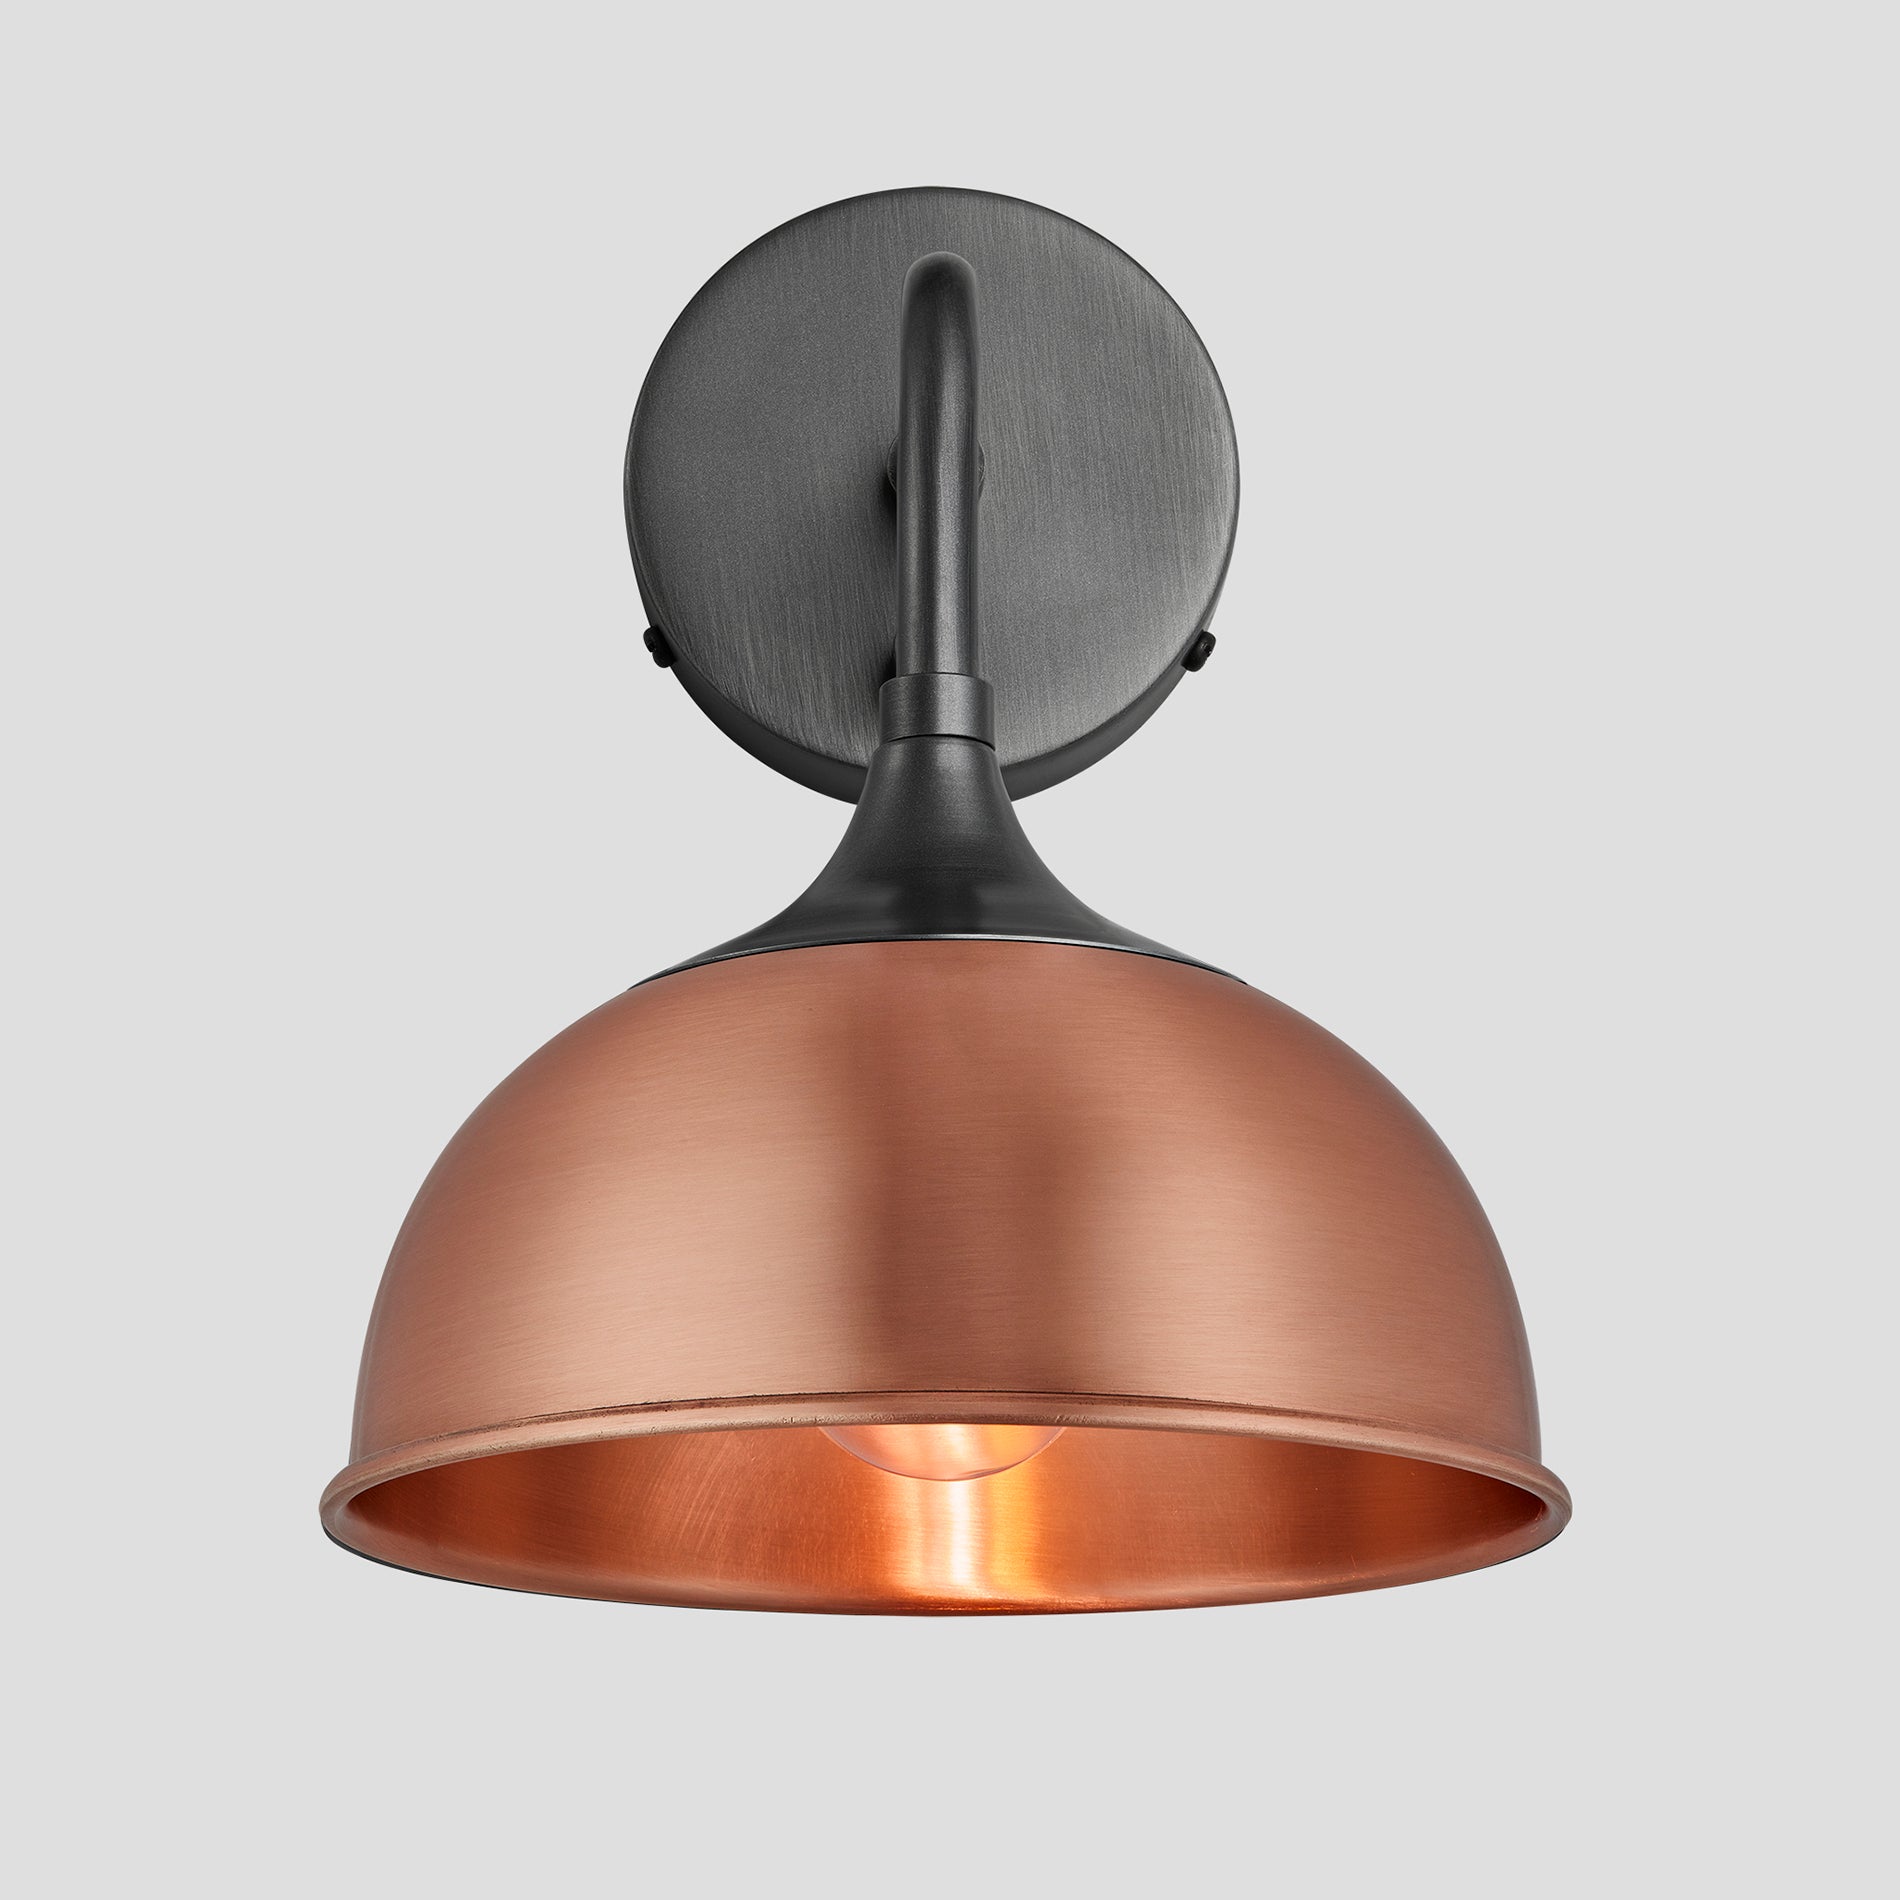 Chelsea Dome Wall Light - 8 Inch - Copper Industville